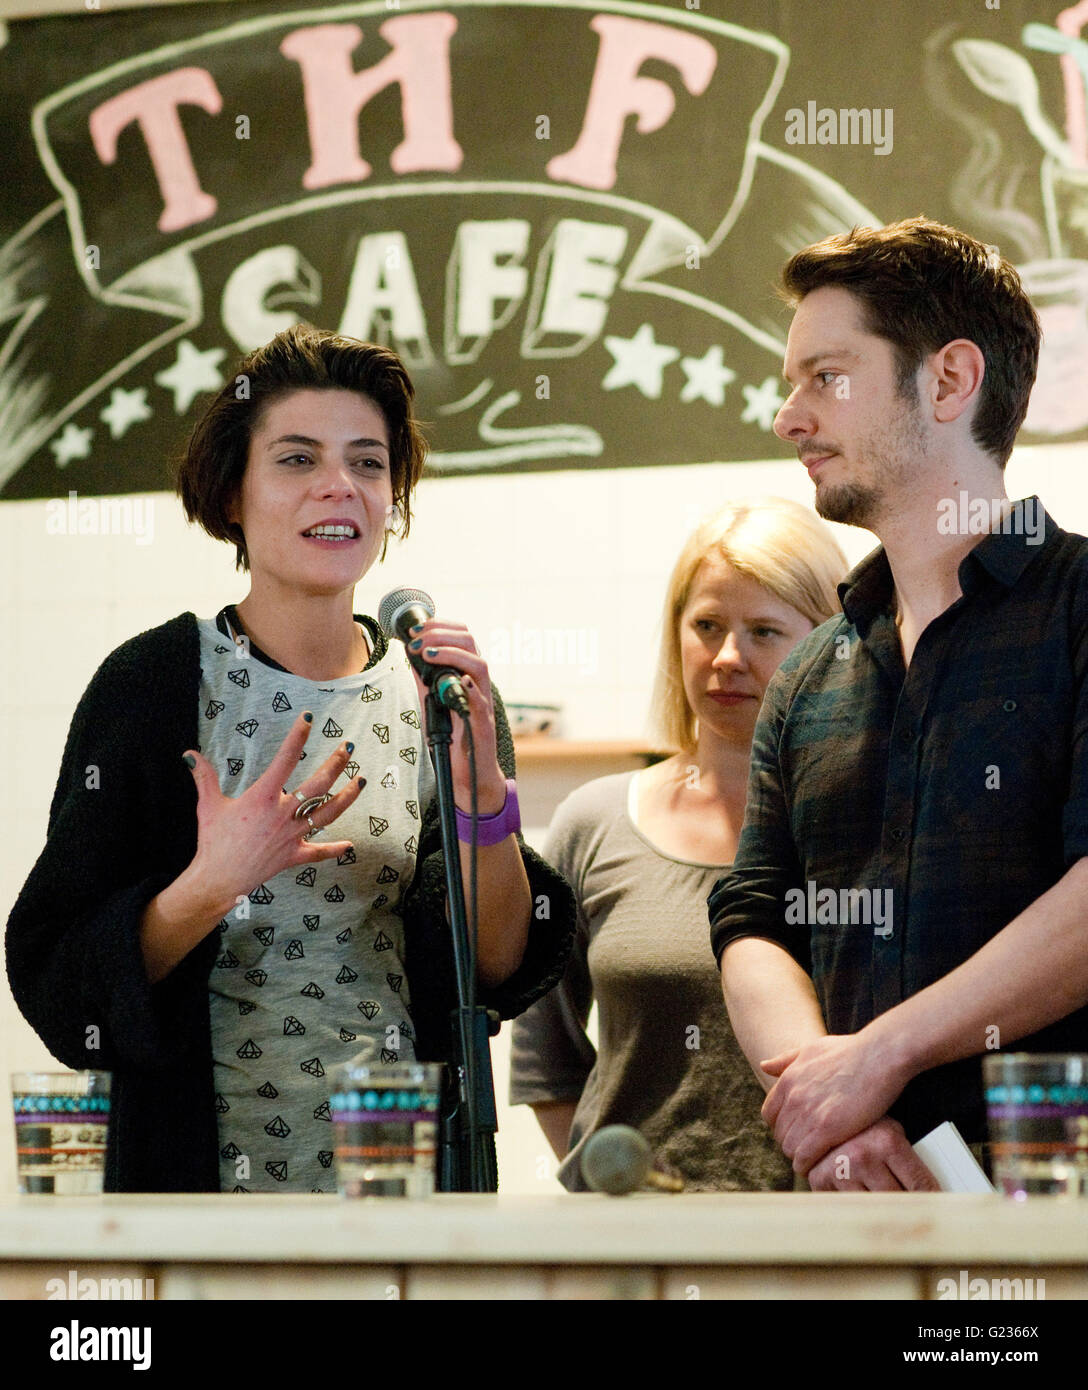 Berlin, Germany. 28th Apr, 2016. Sara Turchetto (L-R), Jacqueline Svilarov and Michael Baral, actors and cast members of the German television series 'Lindenstrasse, ' open the THF cafe for refugees in the former Tempelhof airport in Berlin, Germany, 28 April 2016. A cafe and a small library located next to the refugee shelter opened on the same day. Photo: KLAUS DIETMAR GABBERT/dpa/Alamy Live News Stock Photo